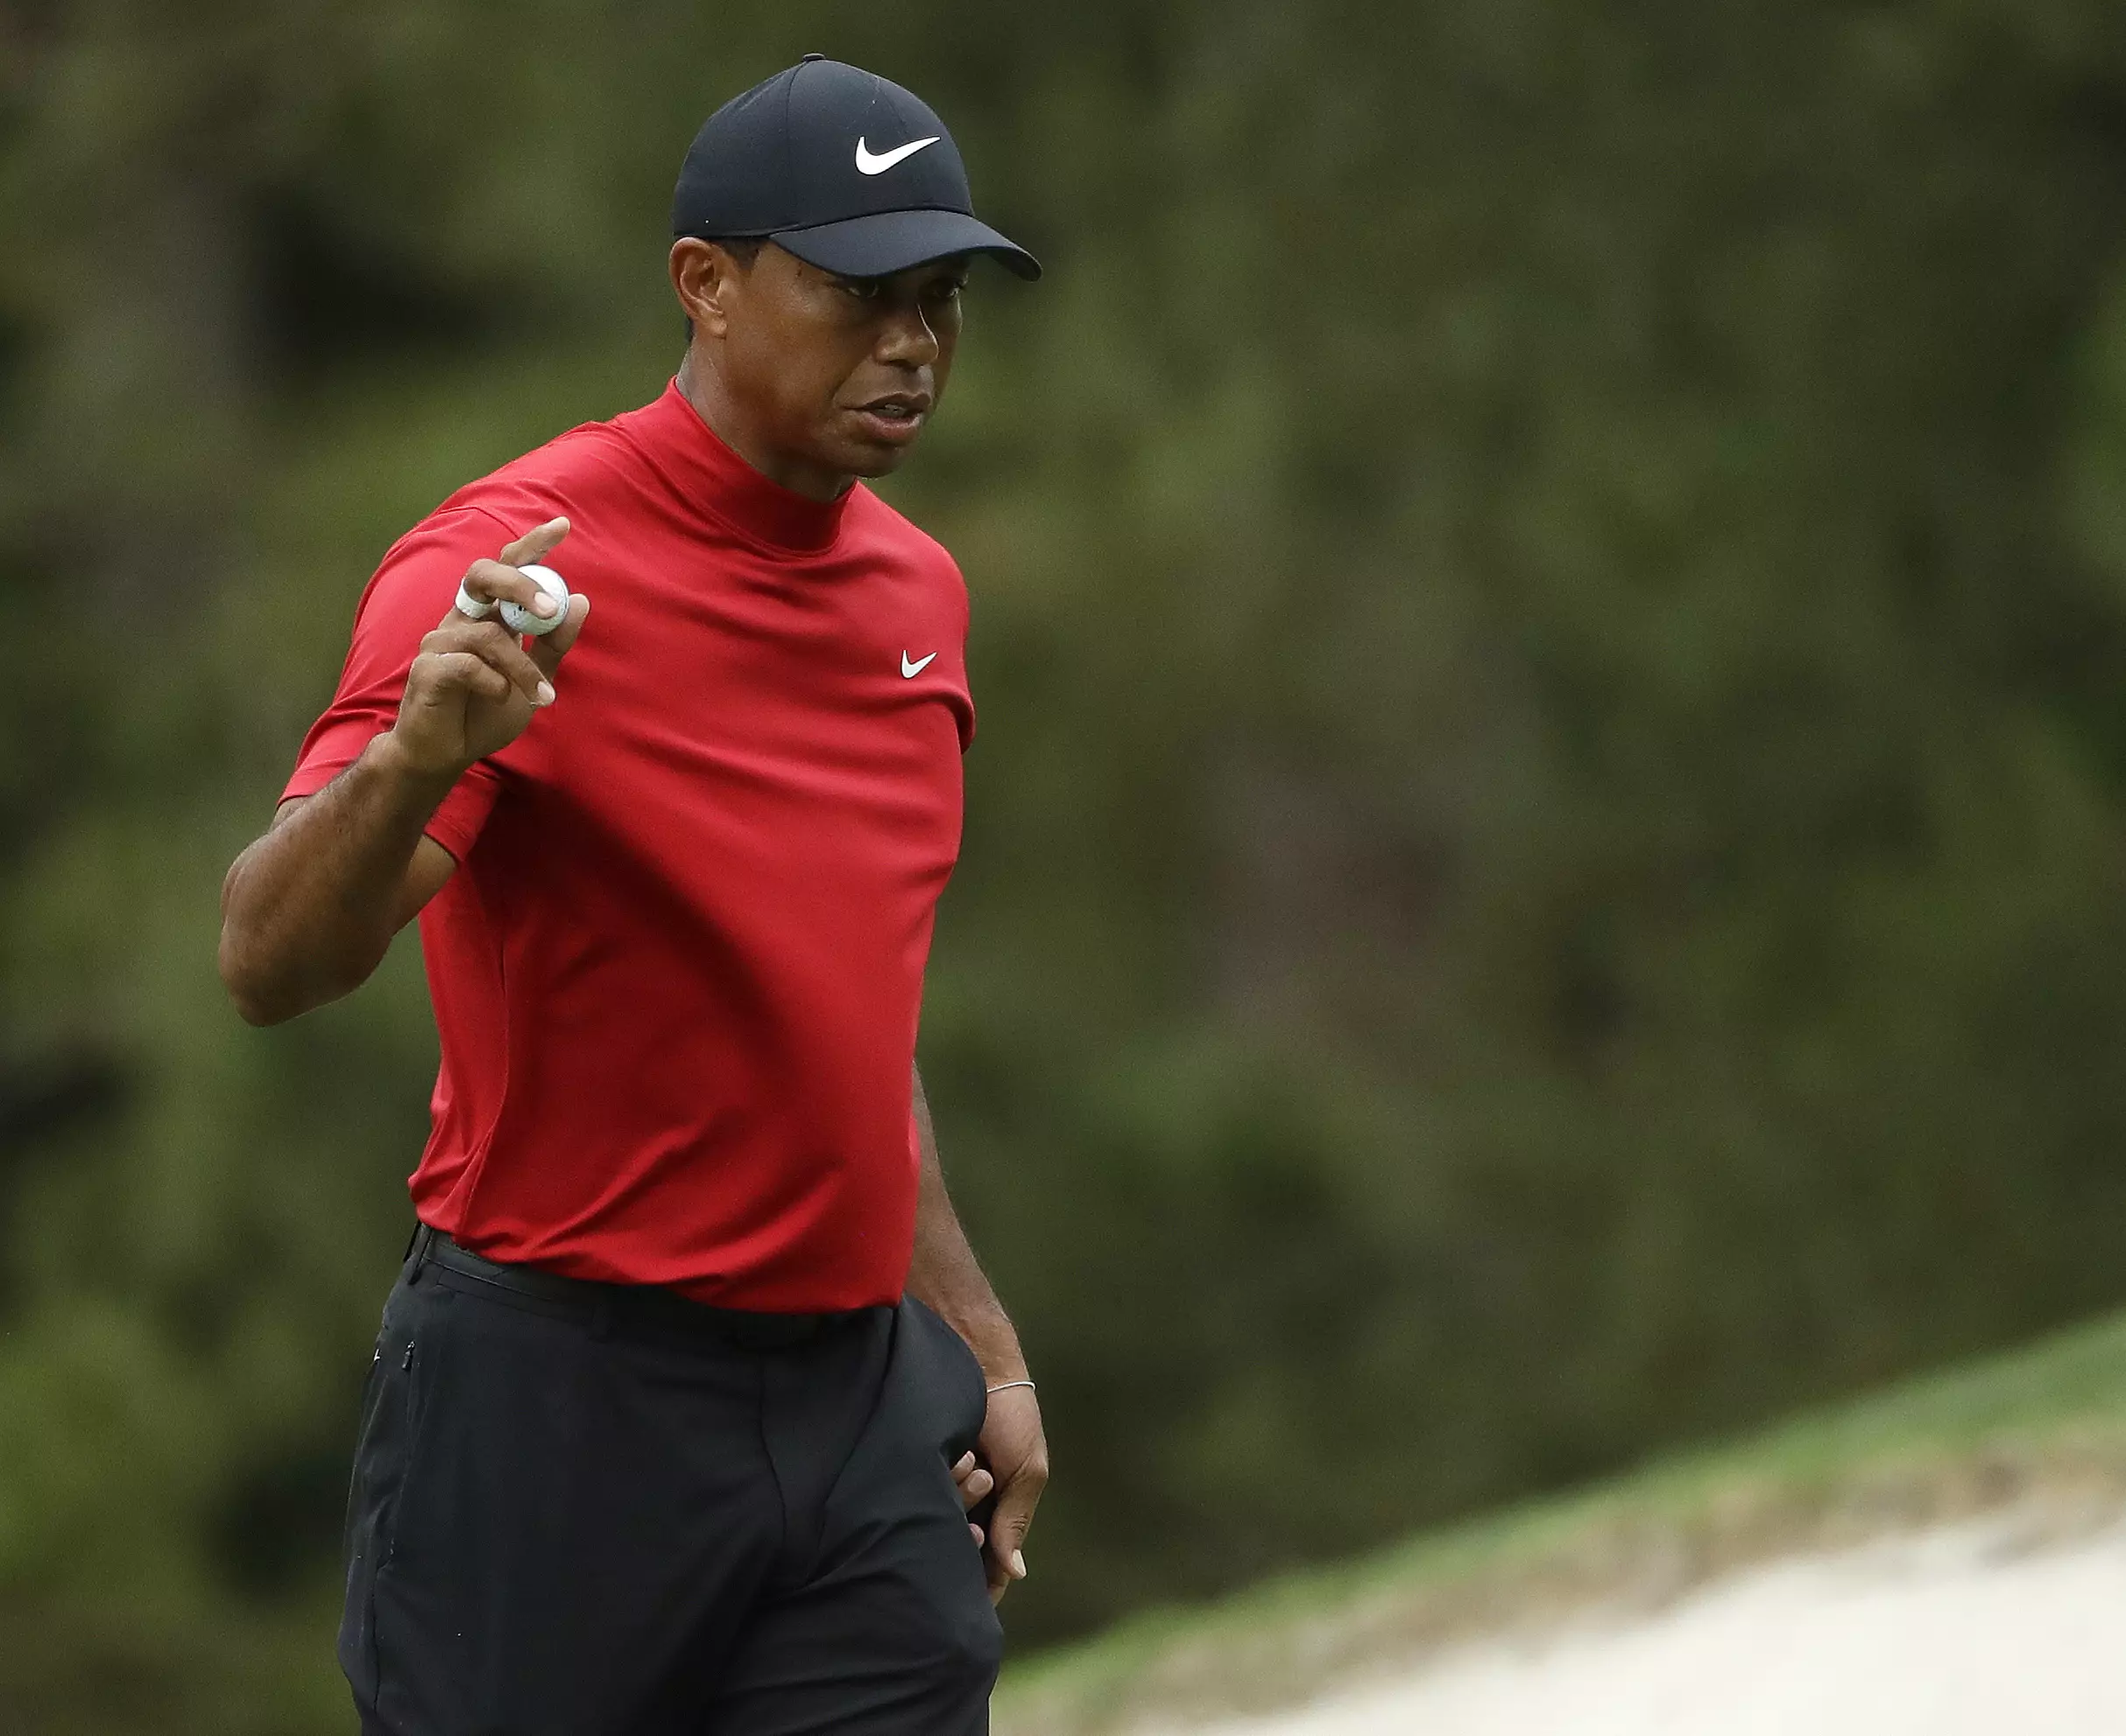 Woods was wearing his distinctive fourth round attire. Image: PA Images